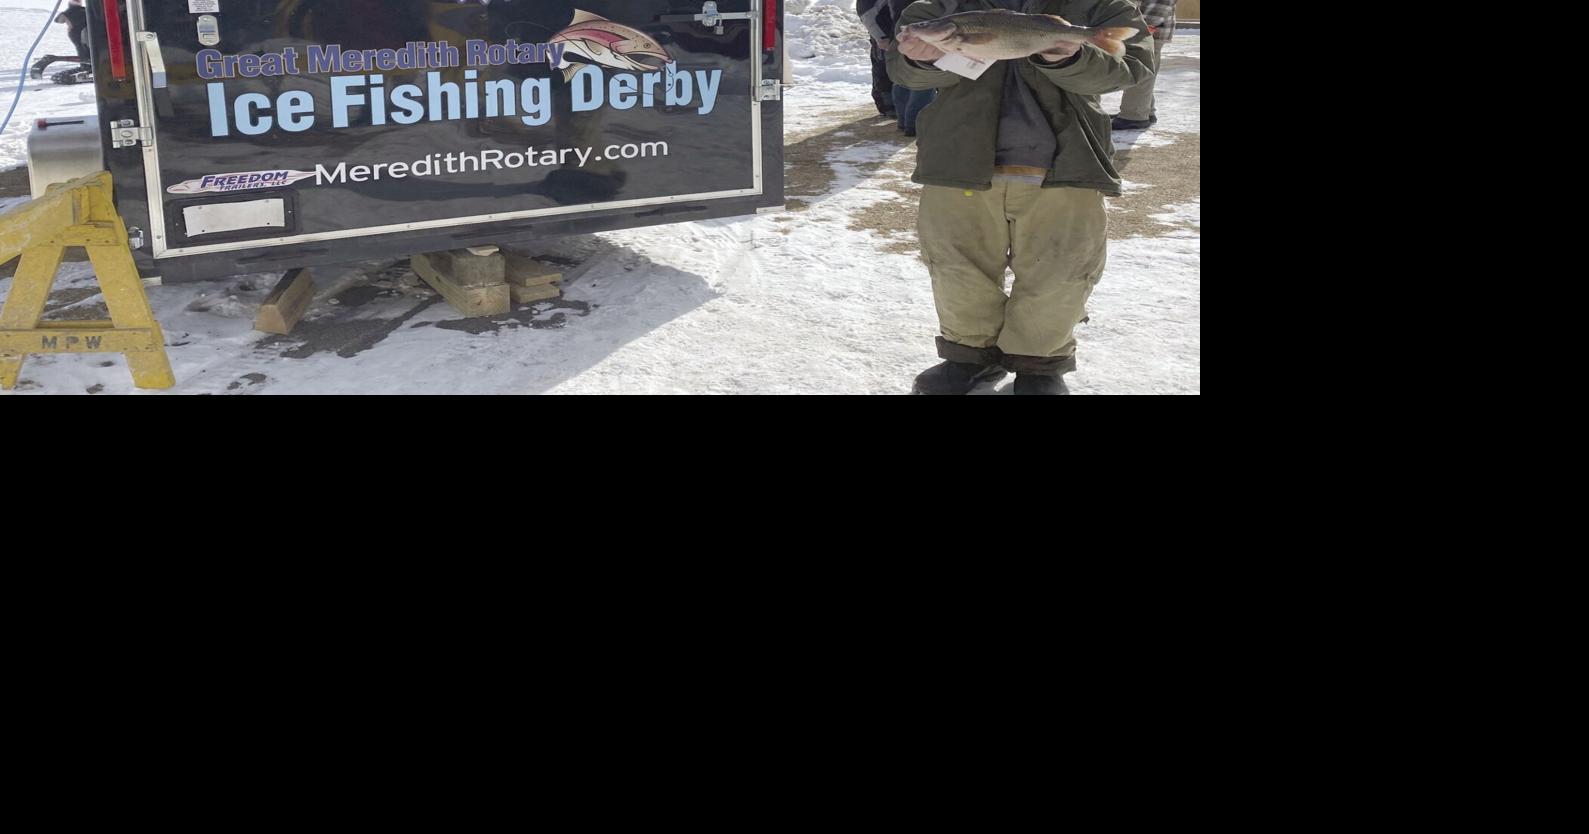 Meredith fishing derby called best in recent memory, Local News